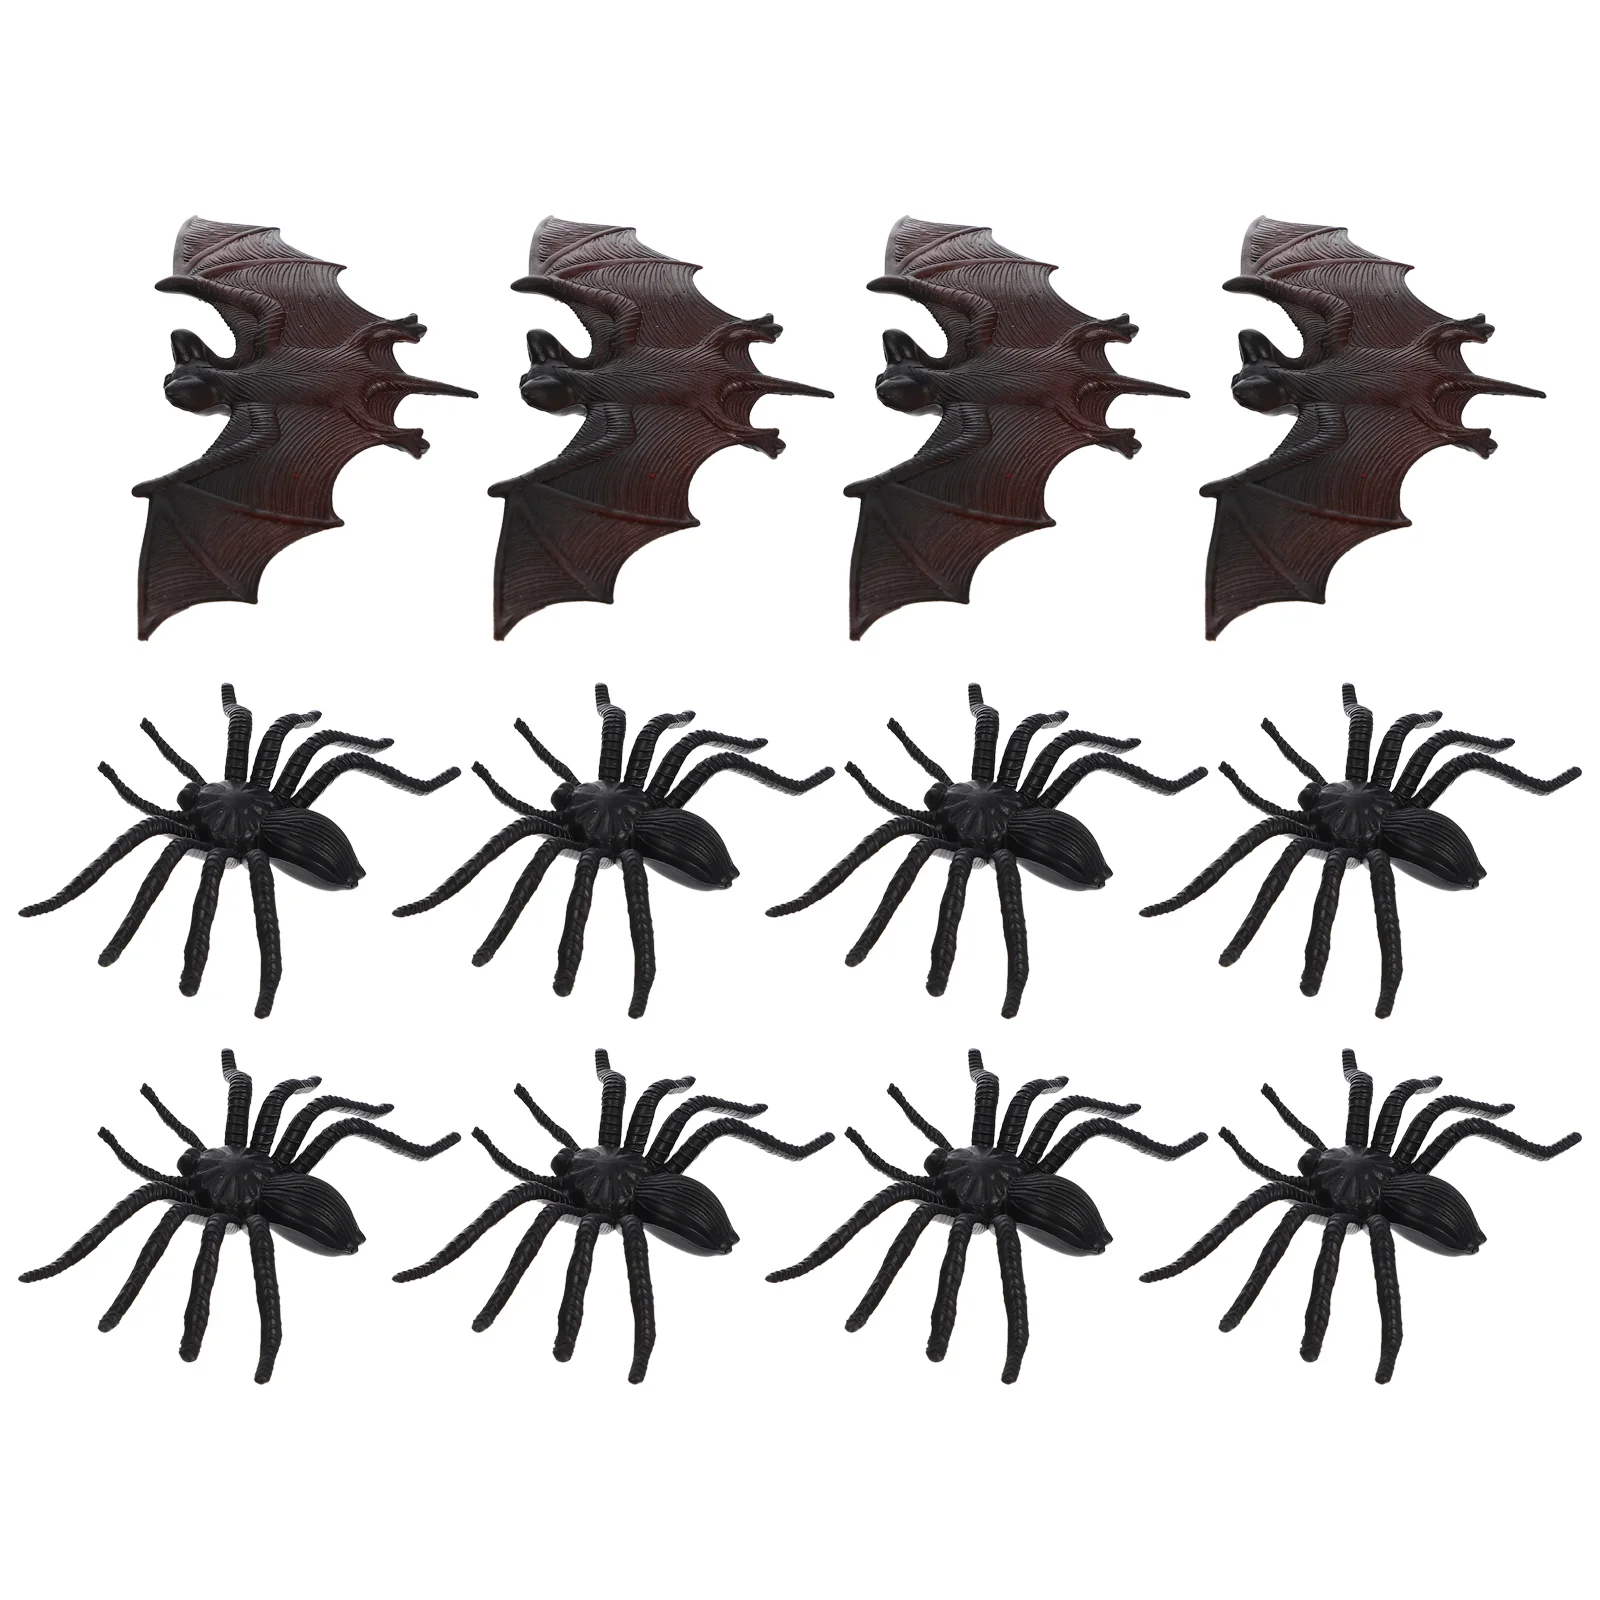 

Spiders Bats Spiderbat Prank Props Fakeinsectrealistic Simulation Prop Scary Small Simulated Decor Terror 3D Trick Treat Party